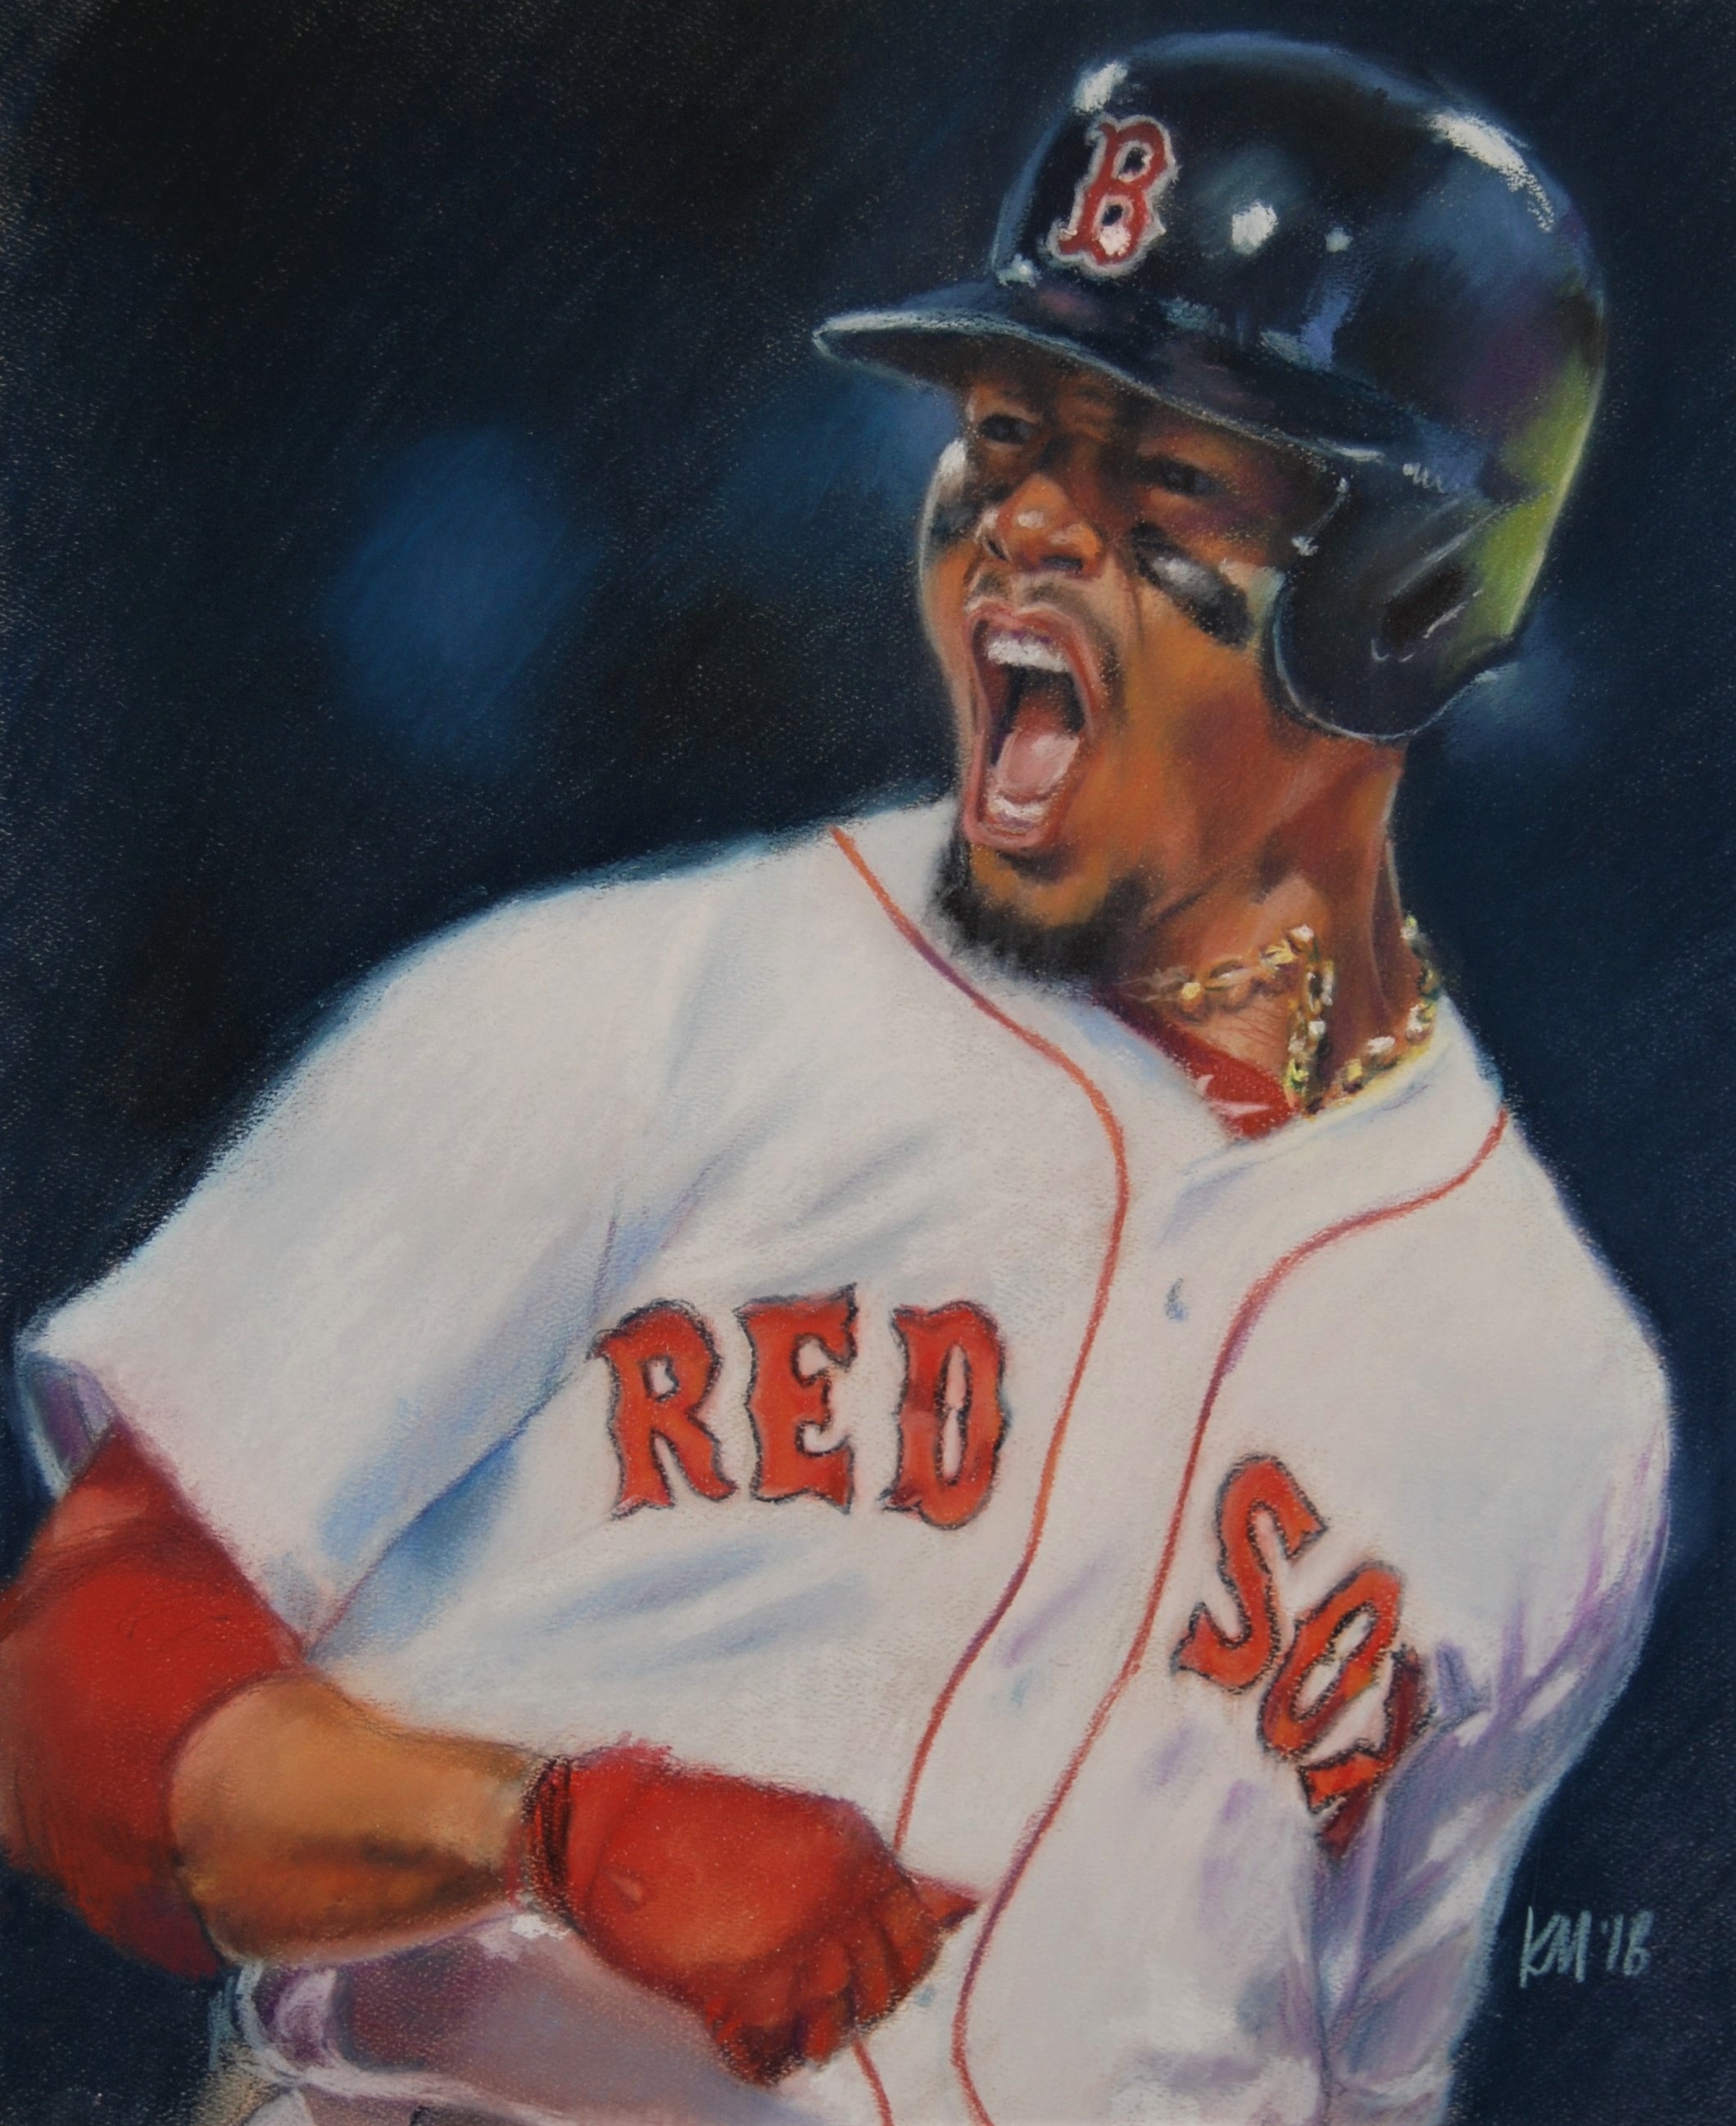 Mookie's Grand Slam, color pastel on paper, 2018